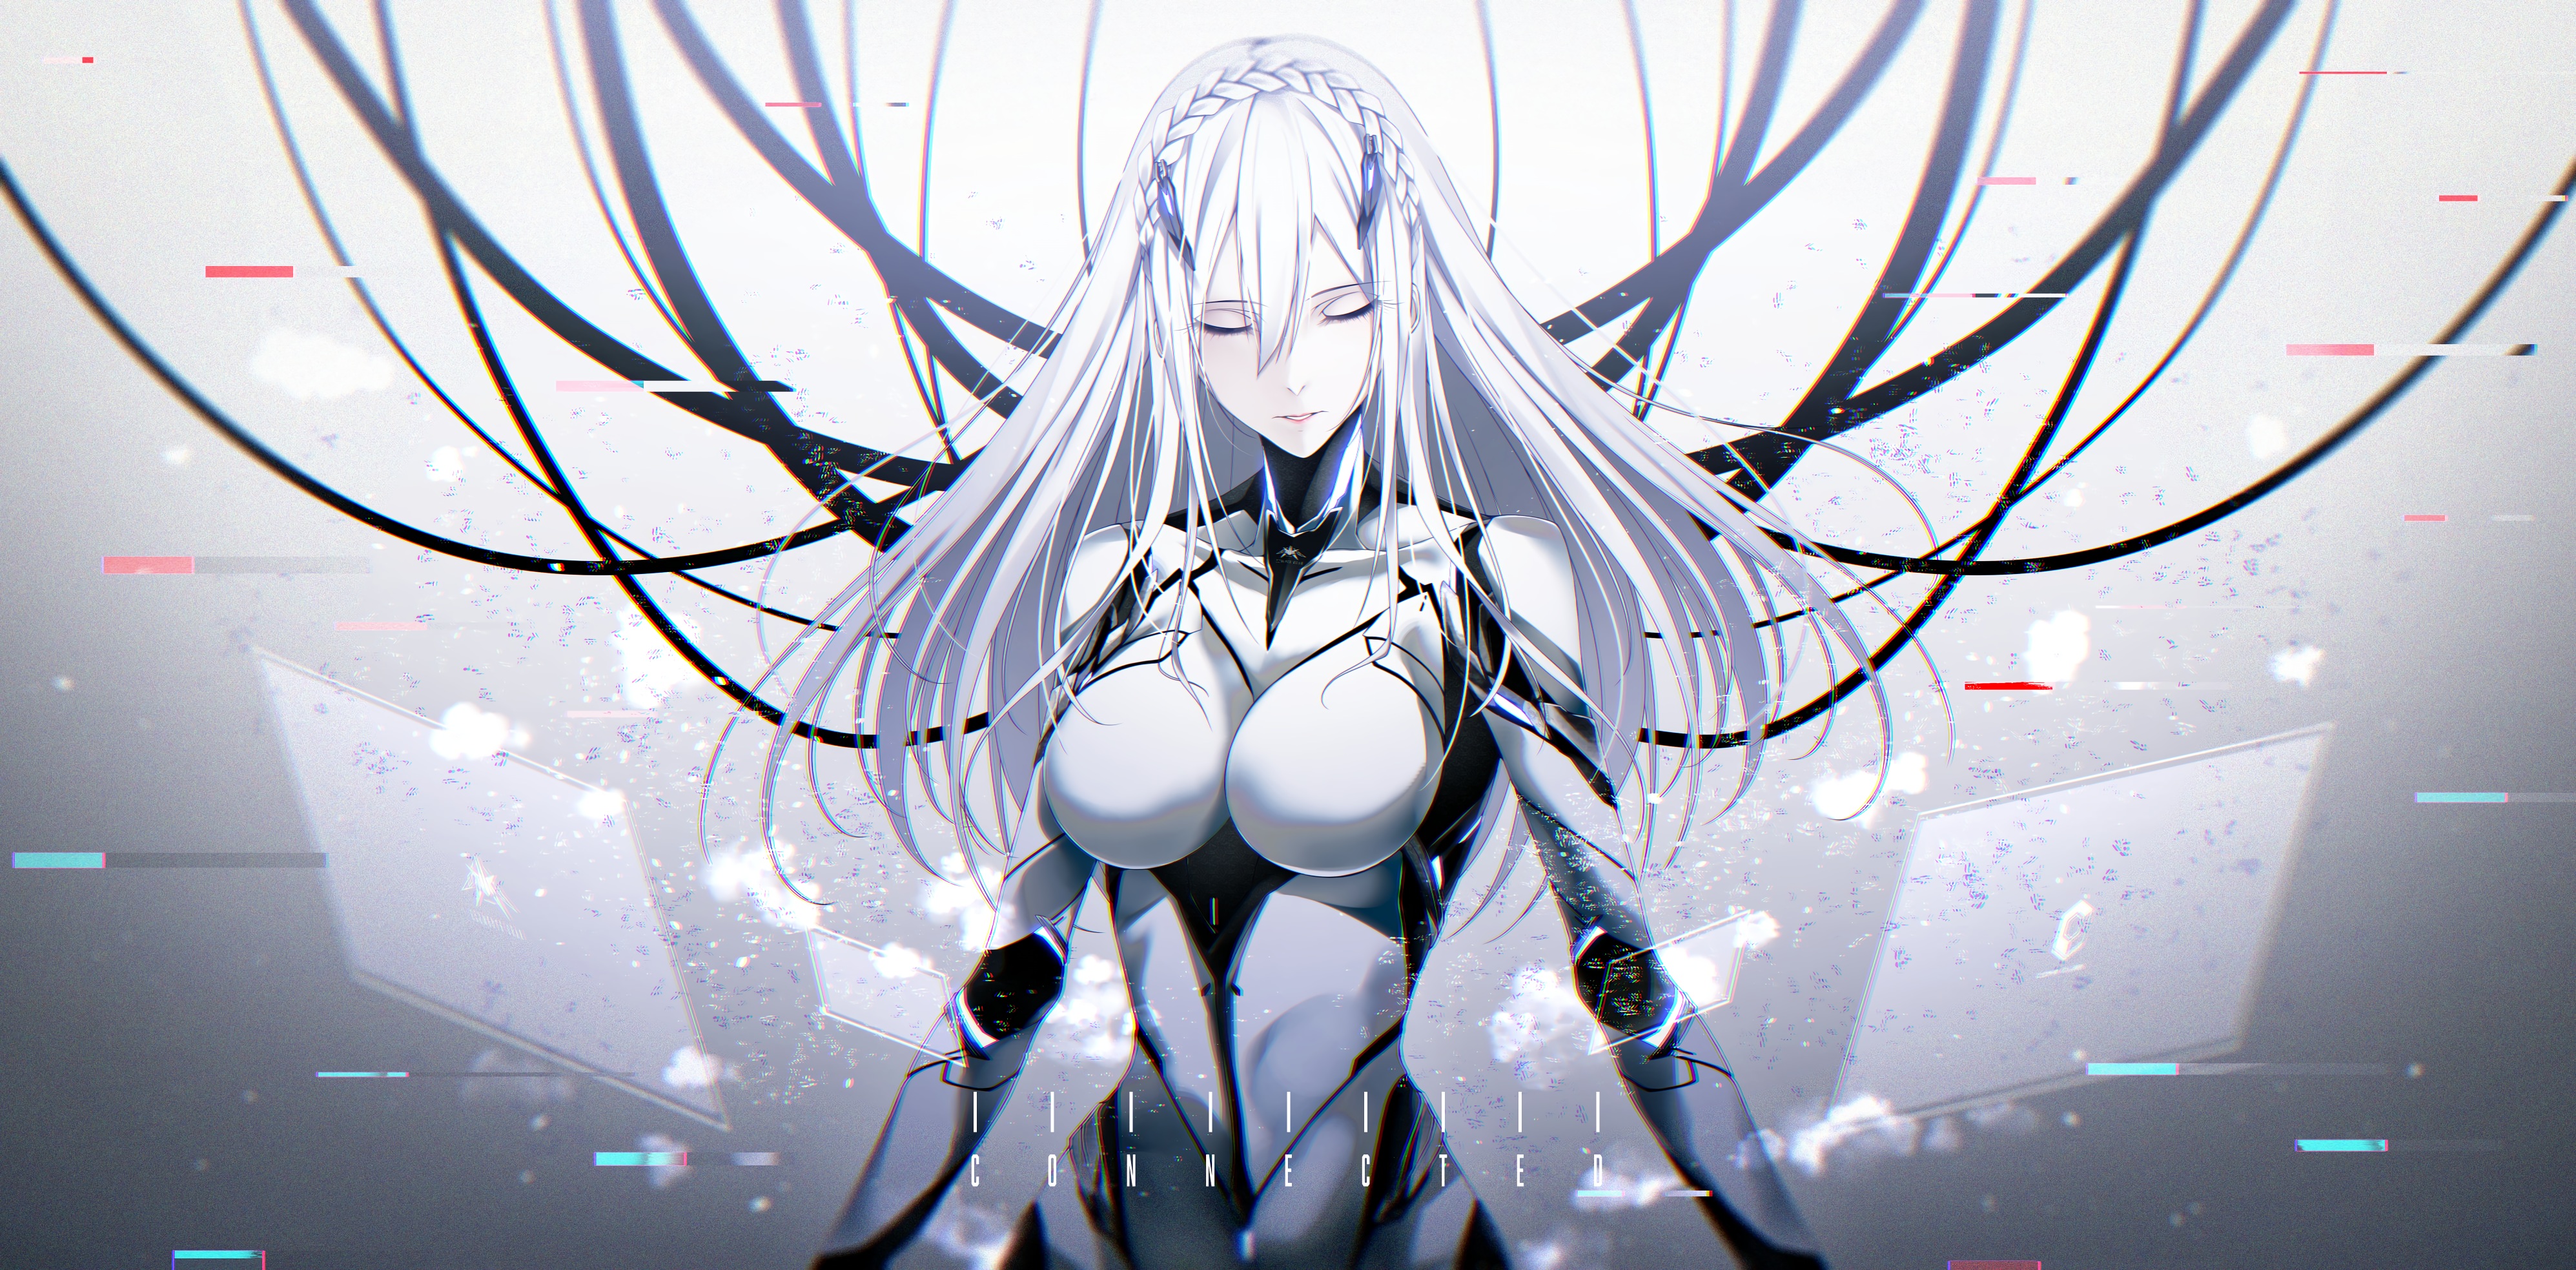 Anime Girl in Futuristic White Armor by AI Chan